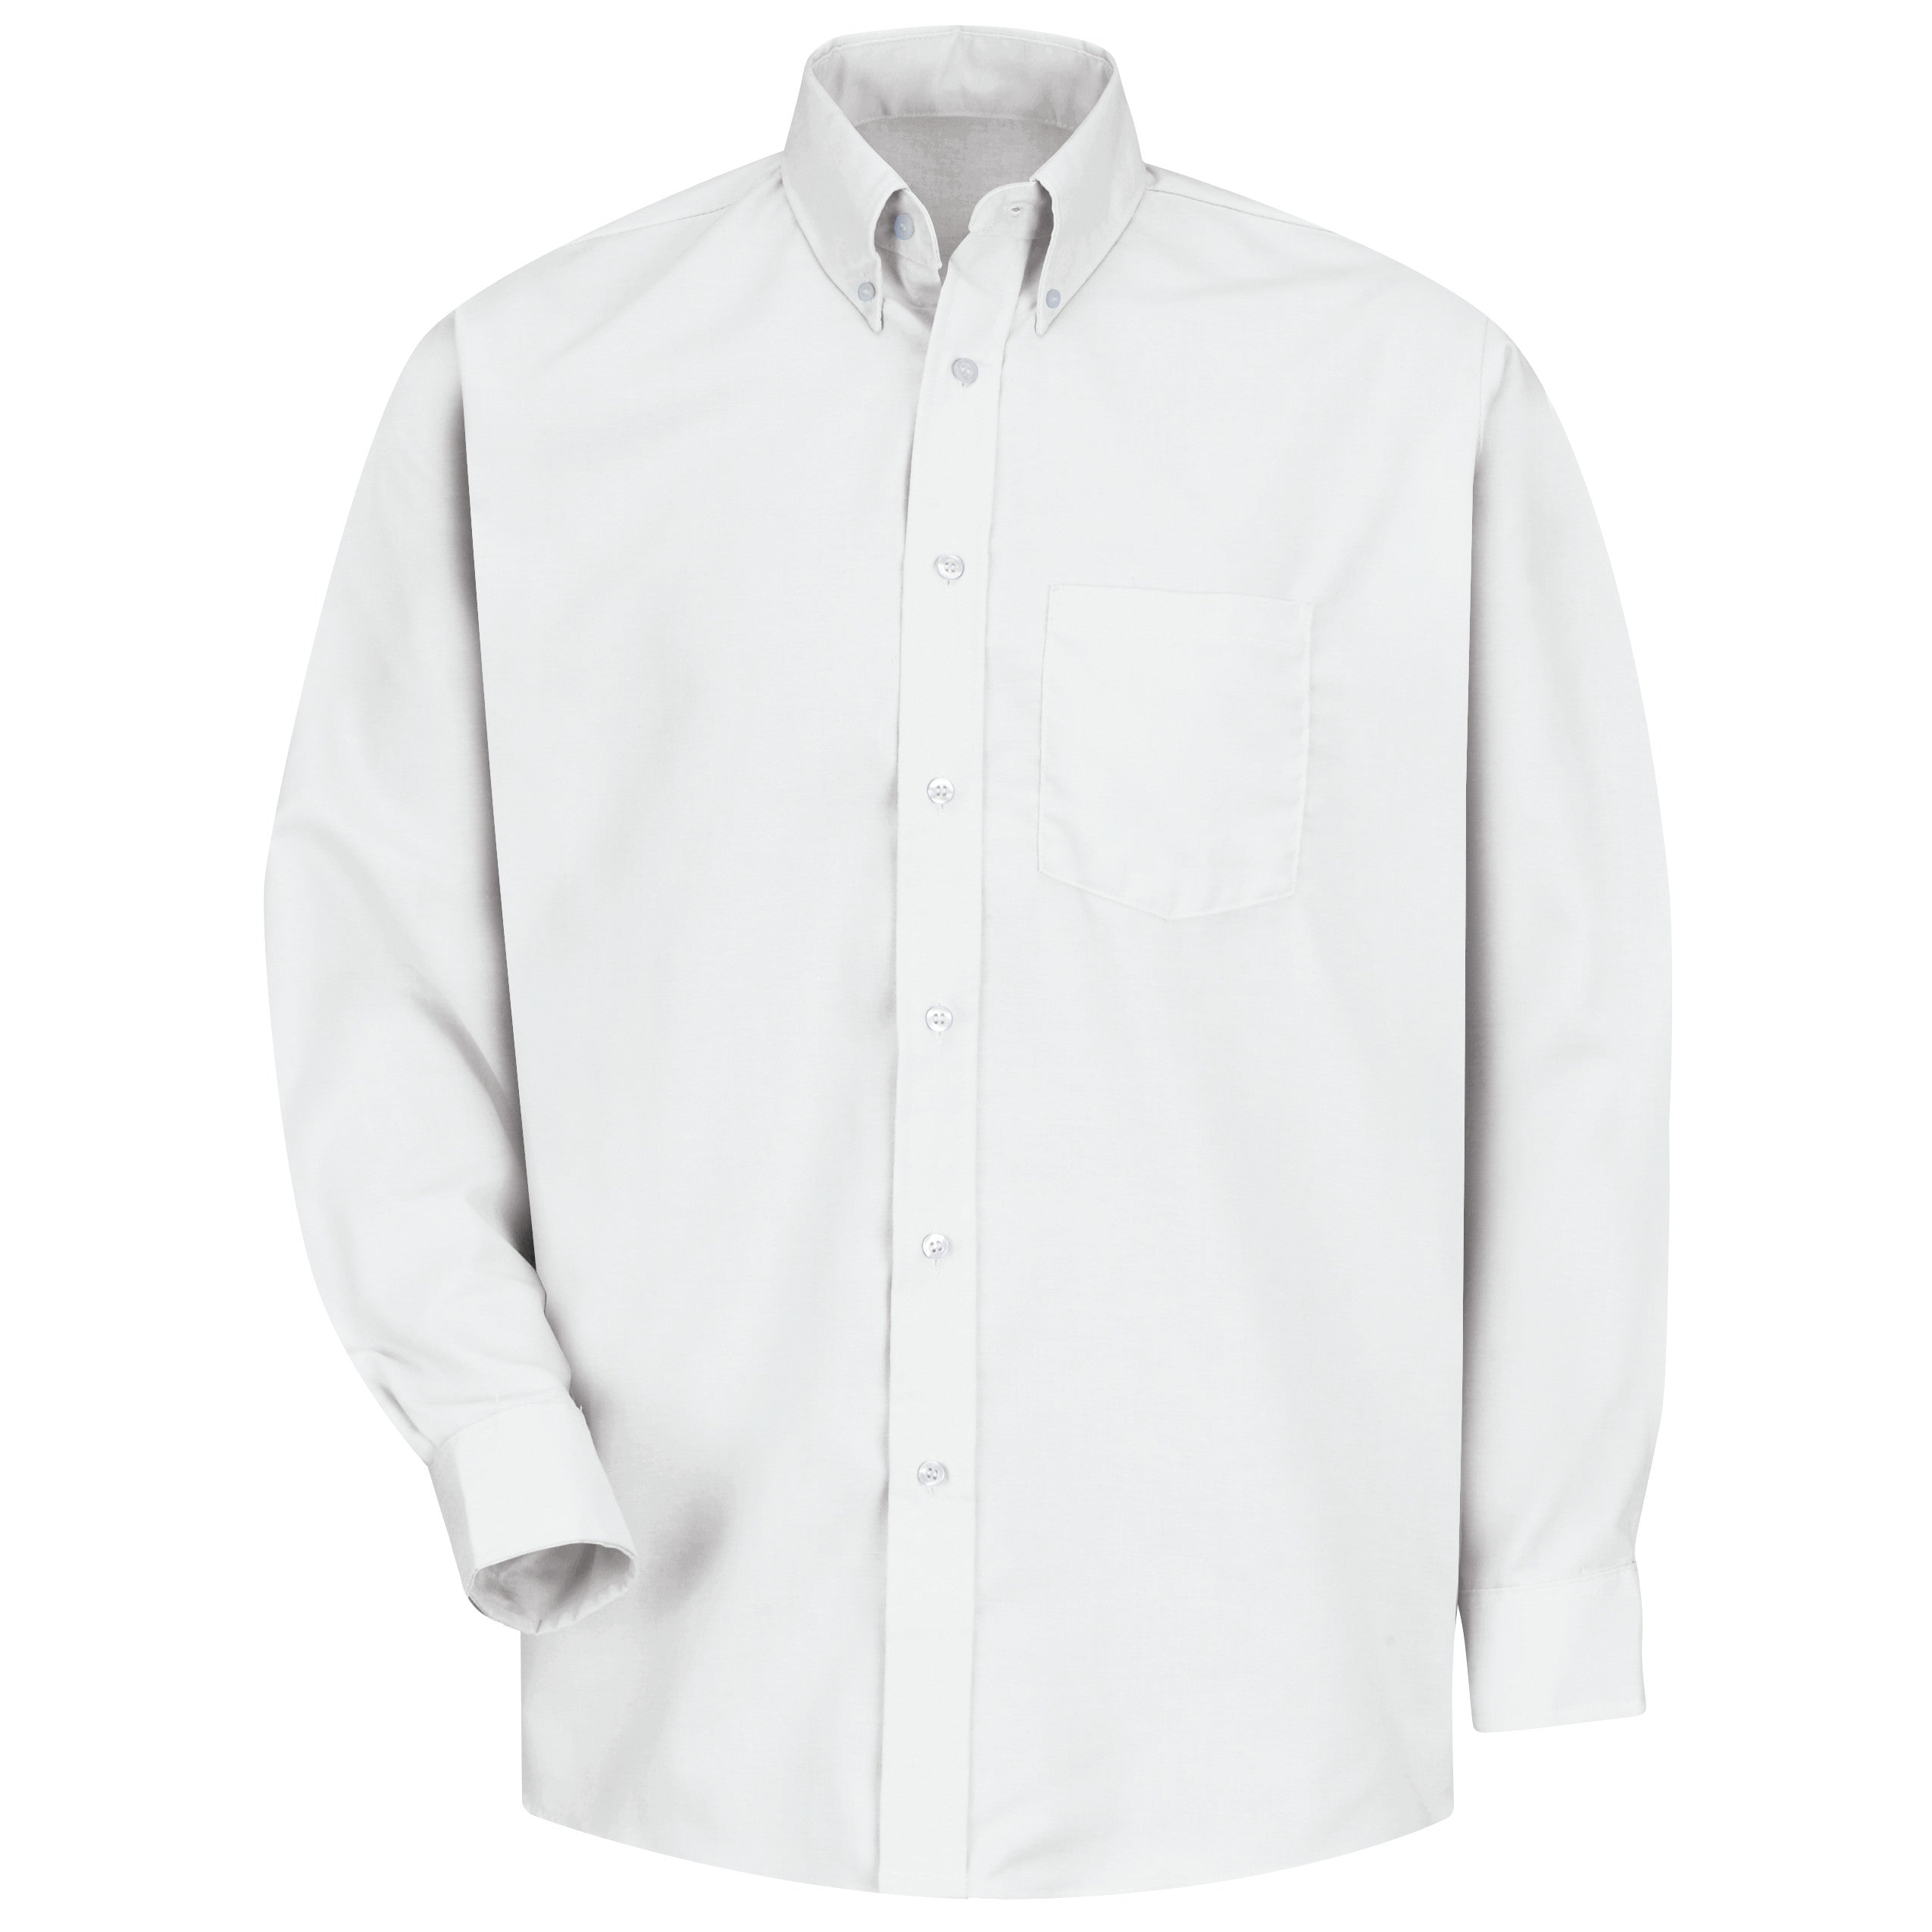 Men's Long Sleeve Easy Care Dress Shirt SS36 - White-eSafety Supplies, Inc